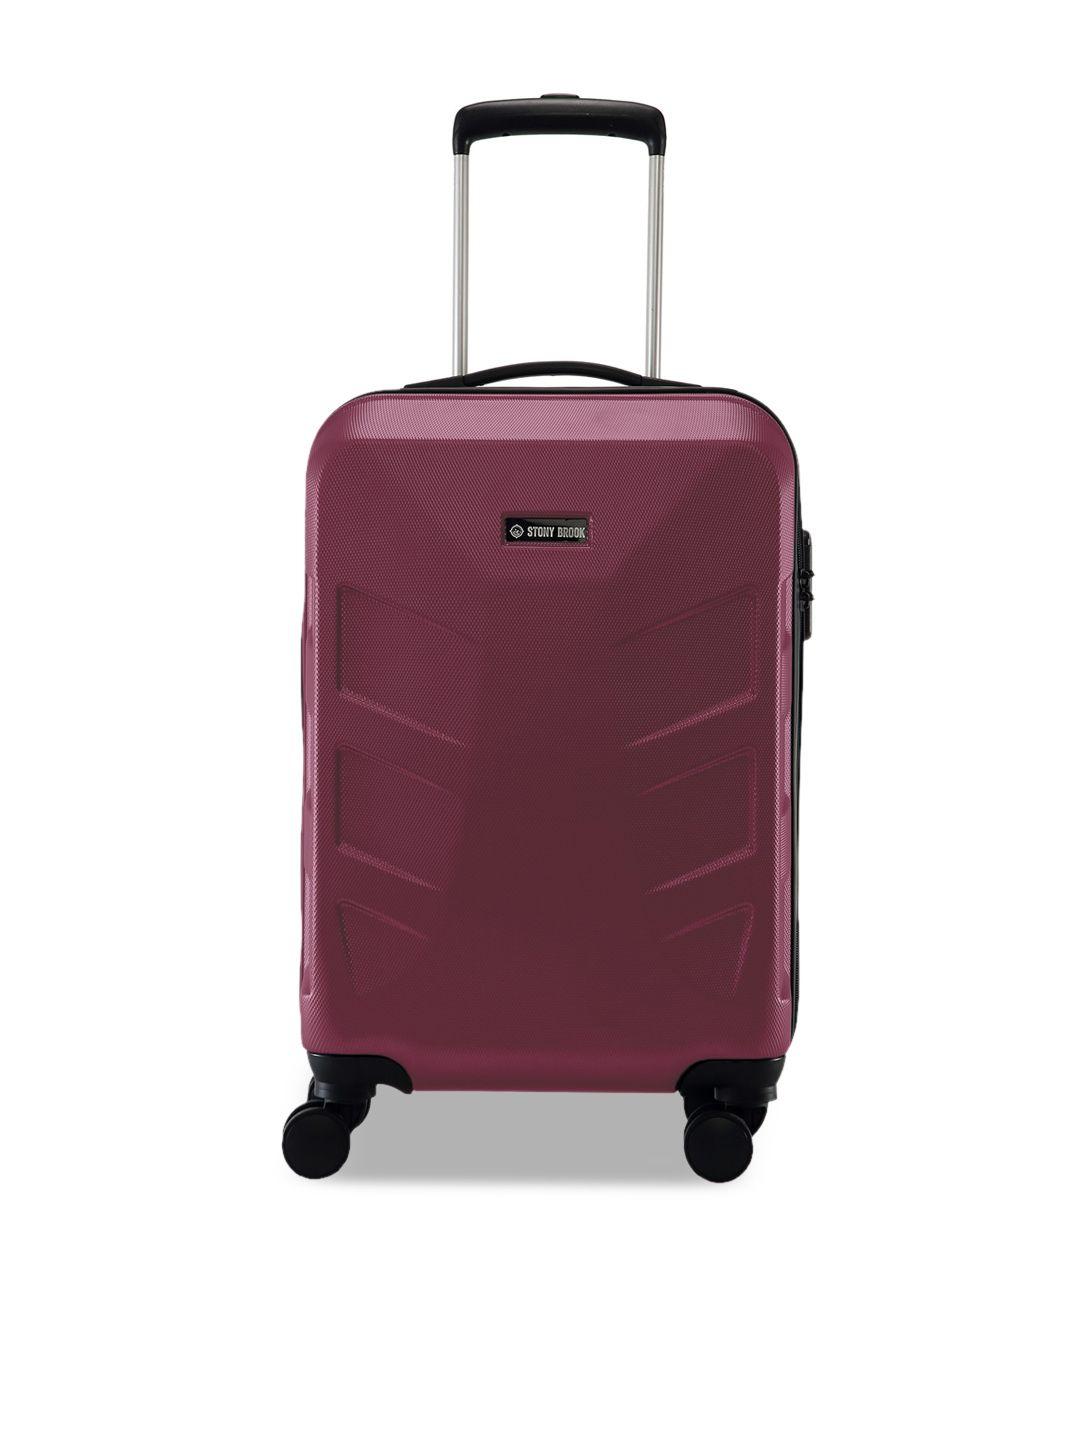 stony brook by nasher miles textured hard-sided cabin trolley suitcase